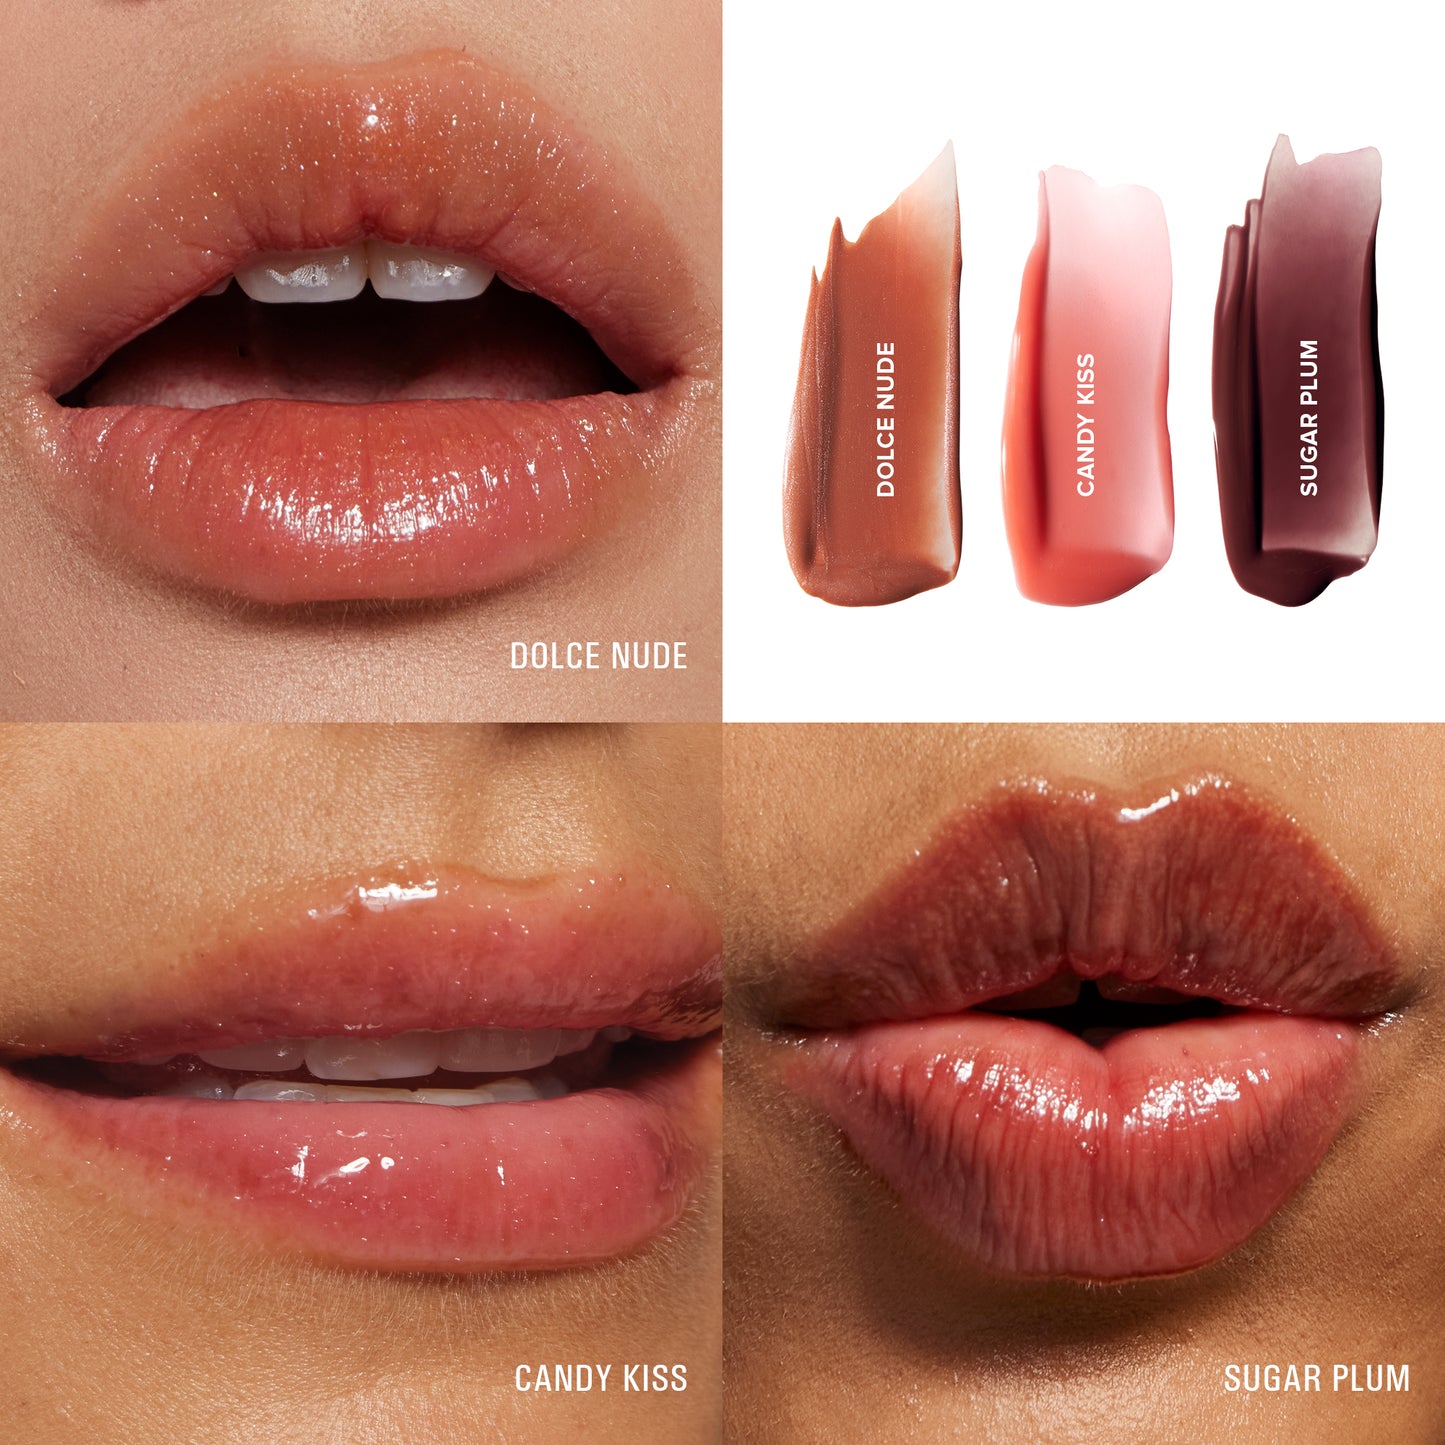 DOLCE NUDE CANDY KISS SUGAR PLUM BEFORE AND AFTER ON MODEL LIPS